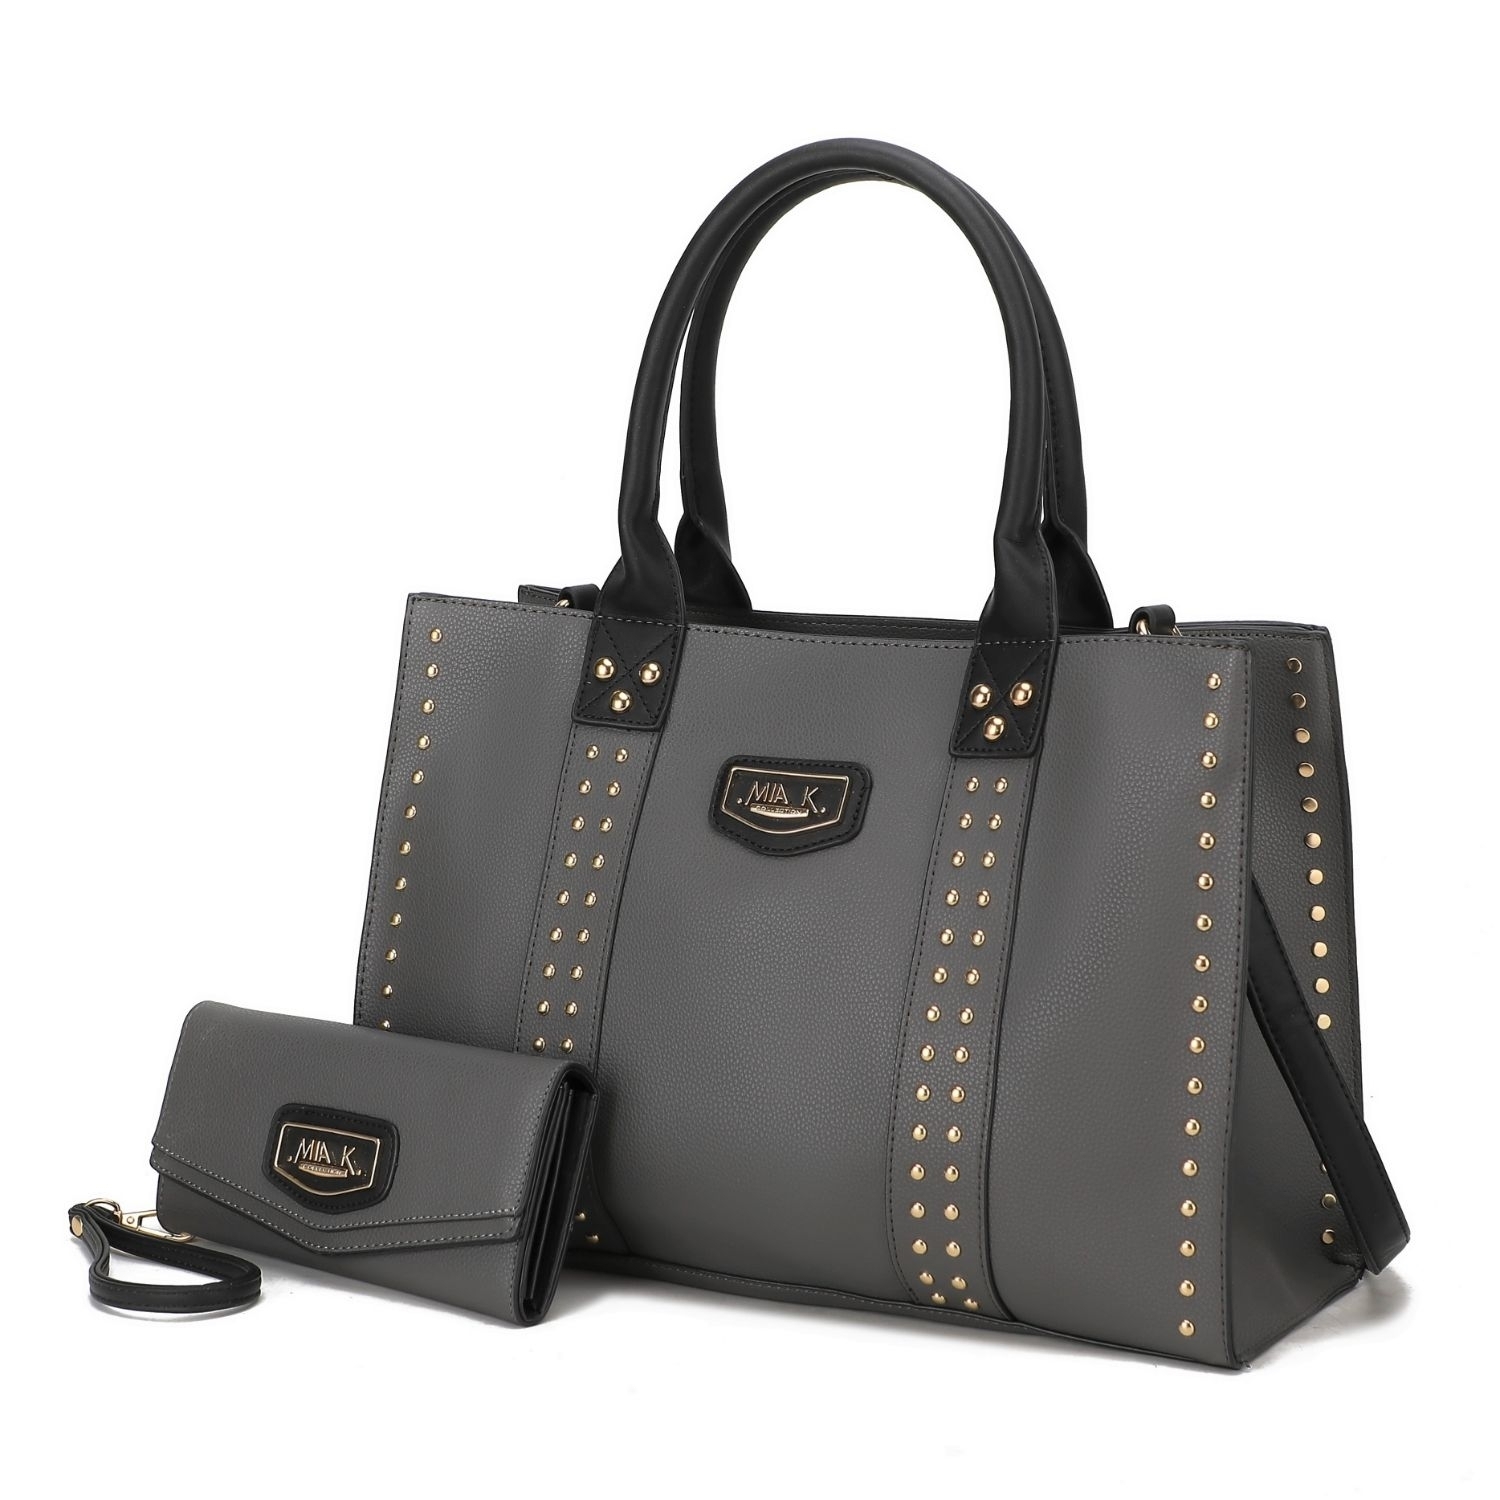 MKF Collection Davina Vegan Leather Women's Tote Bag By Mia K With Wallet -2 Pieces - Charcoal